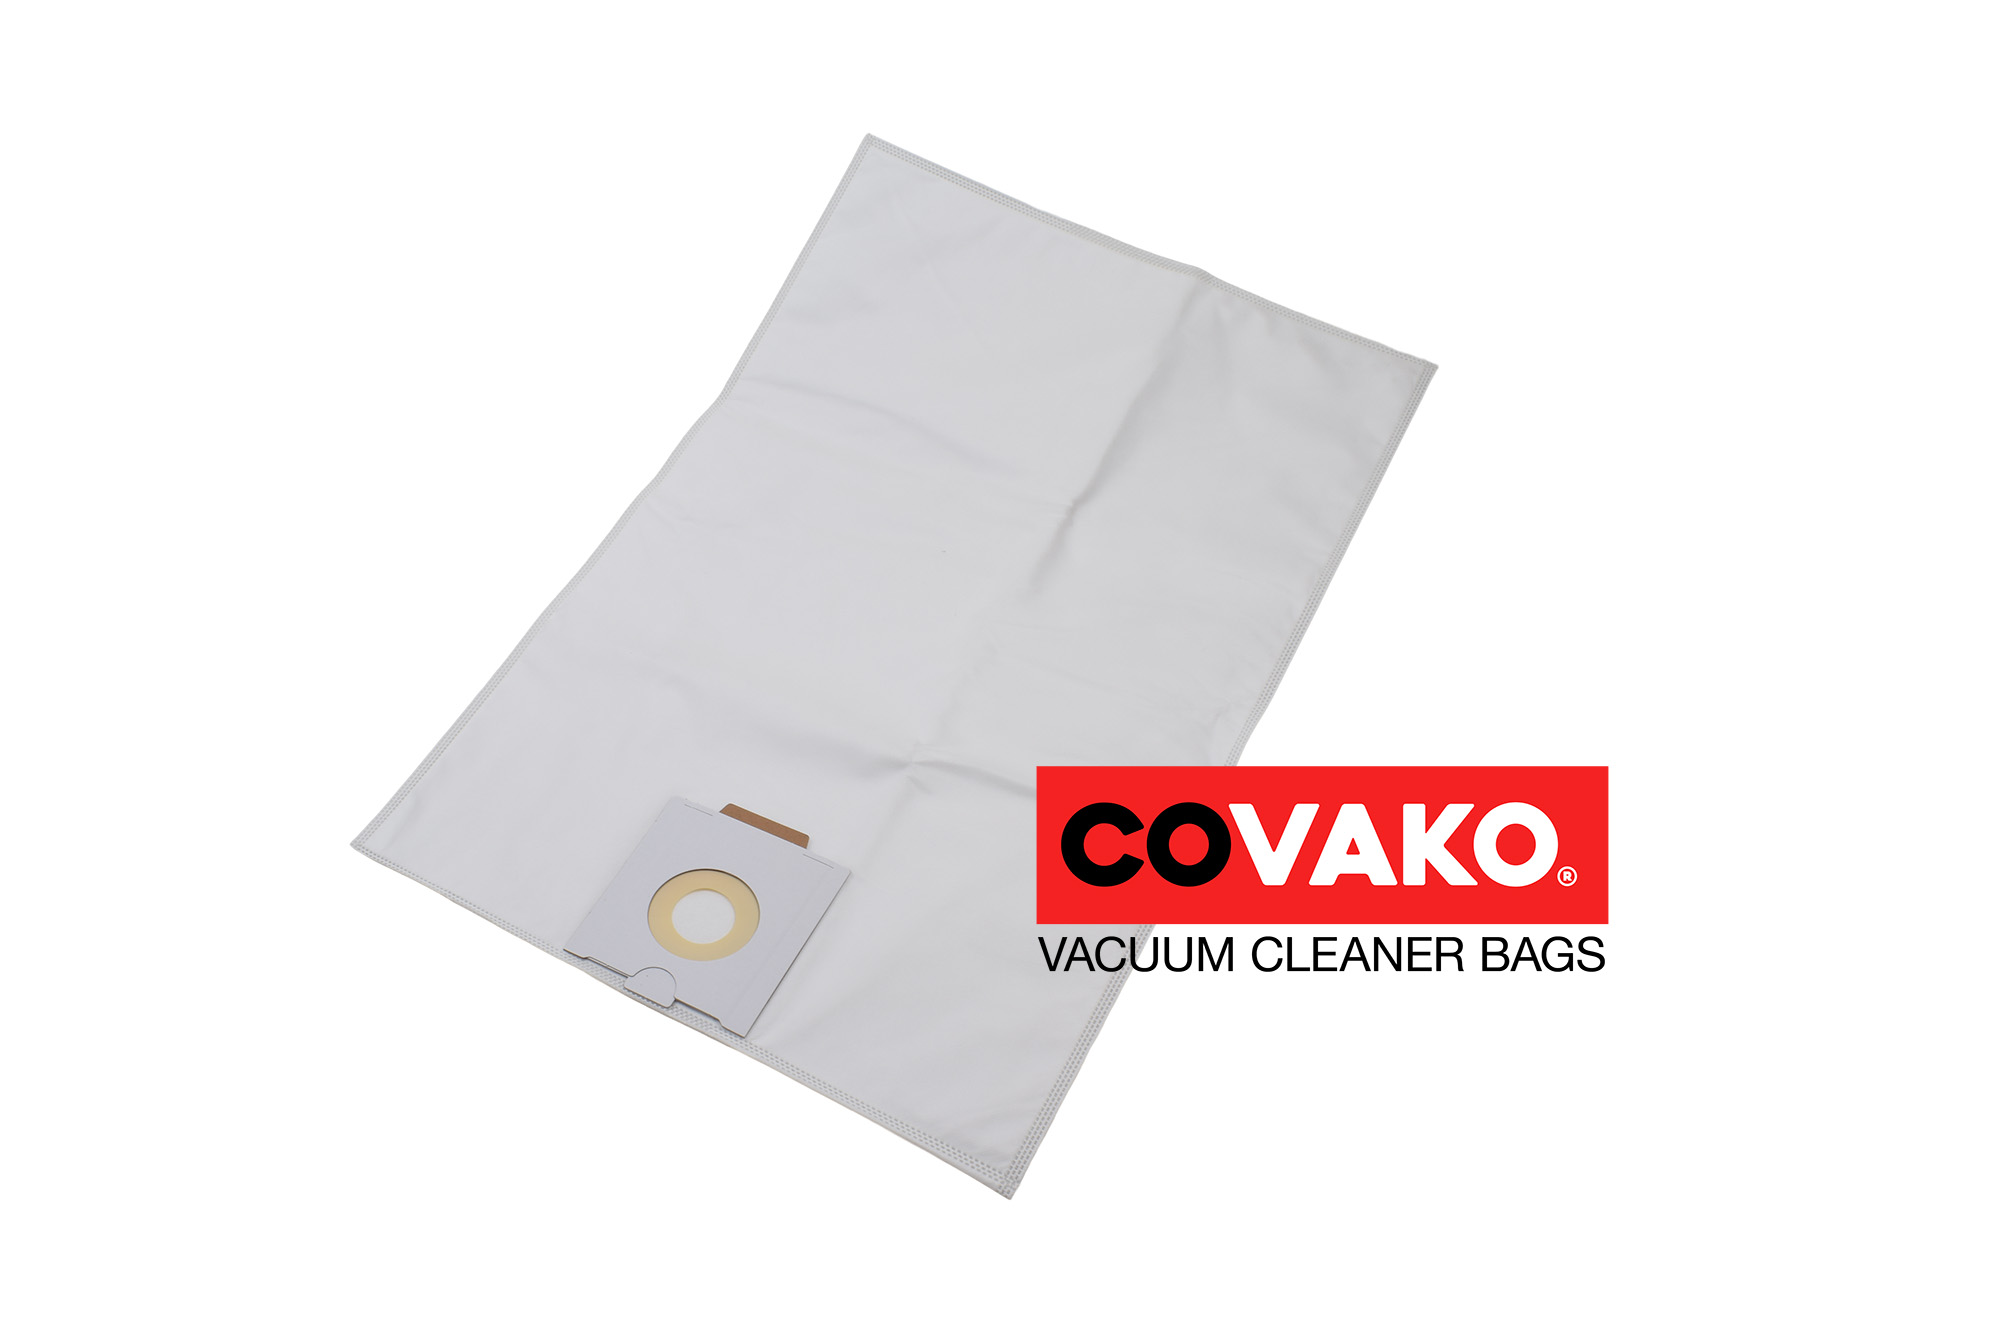 Protool VCP 260 E-M / Synthesis - Protool vacuum cleaner bags